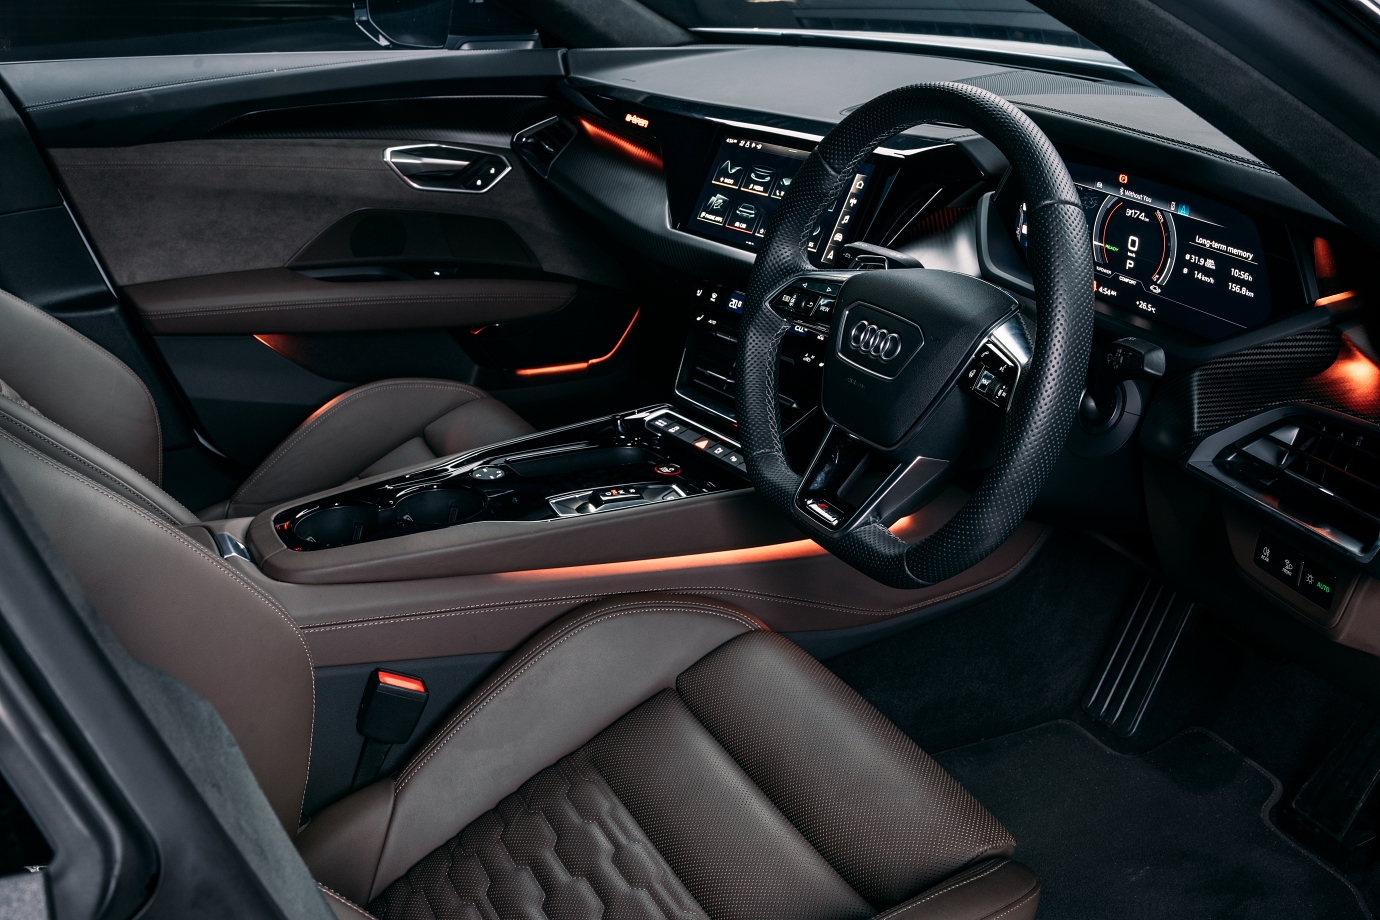 The cabin is familiar Audi territory... but features new EV-specific controls/displays